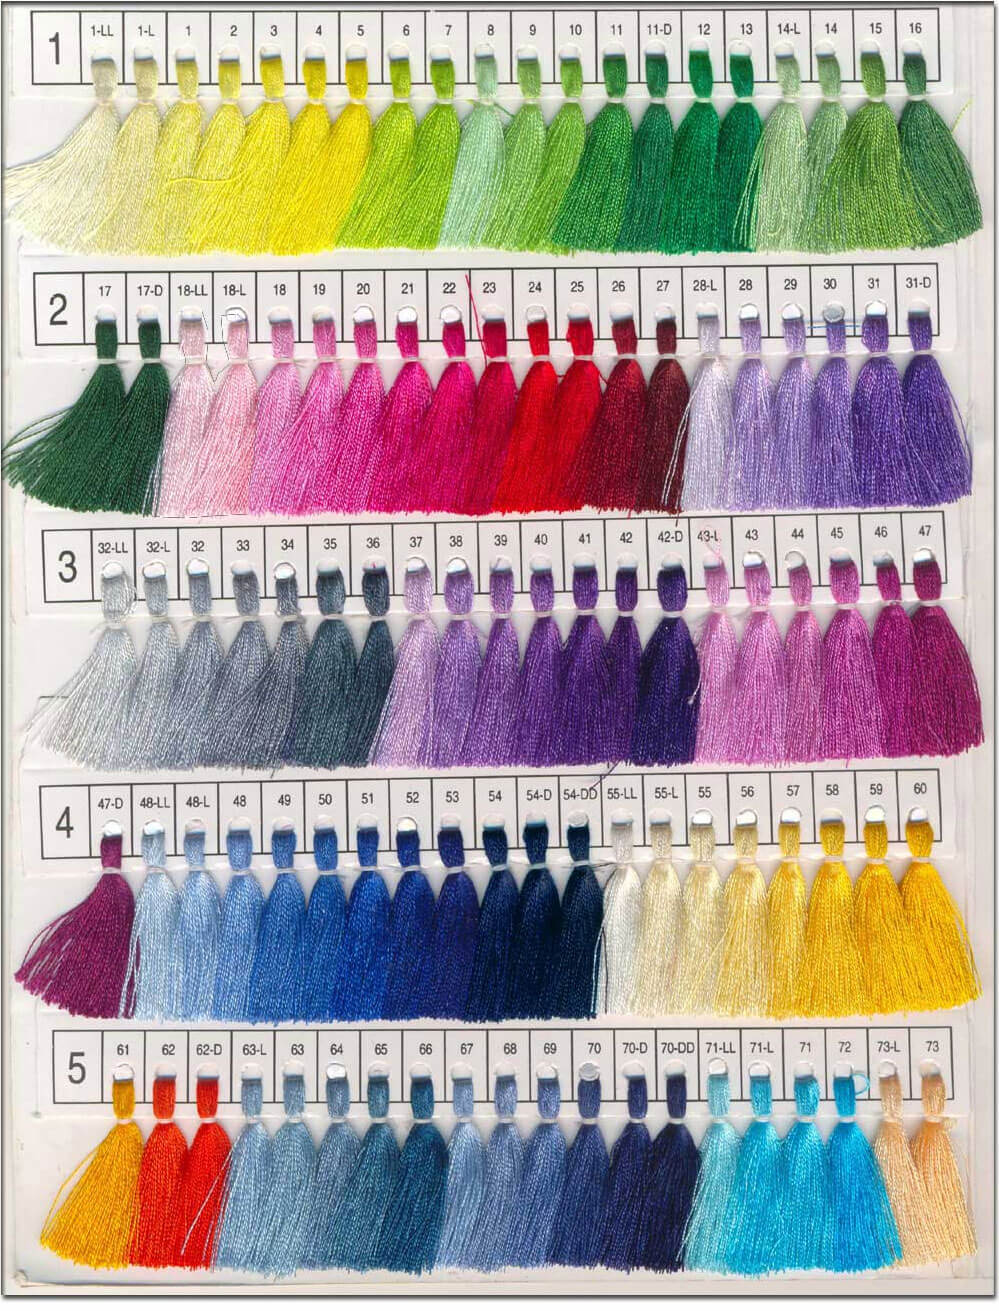 Bajra bespoke color chart first page shows green, yellow, red, grey, pink, purple and blue color hues totaling 100 colors.